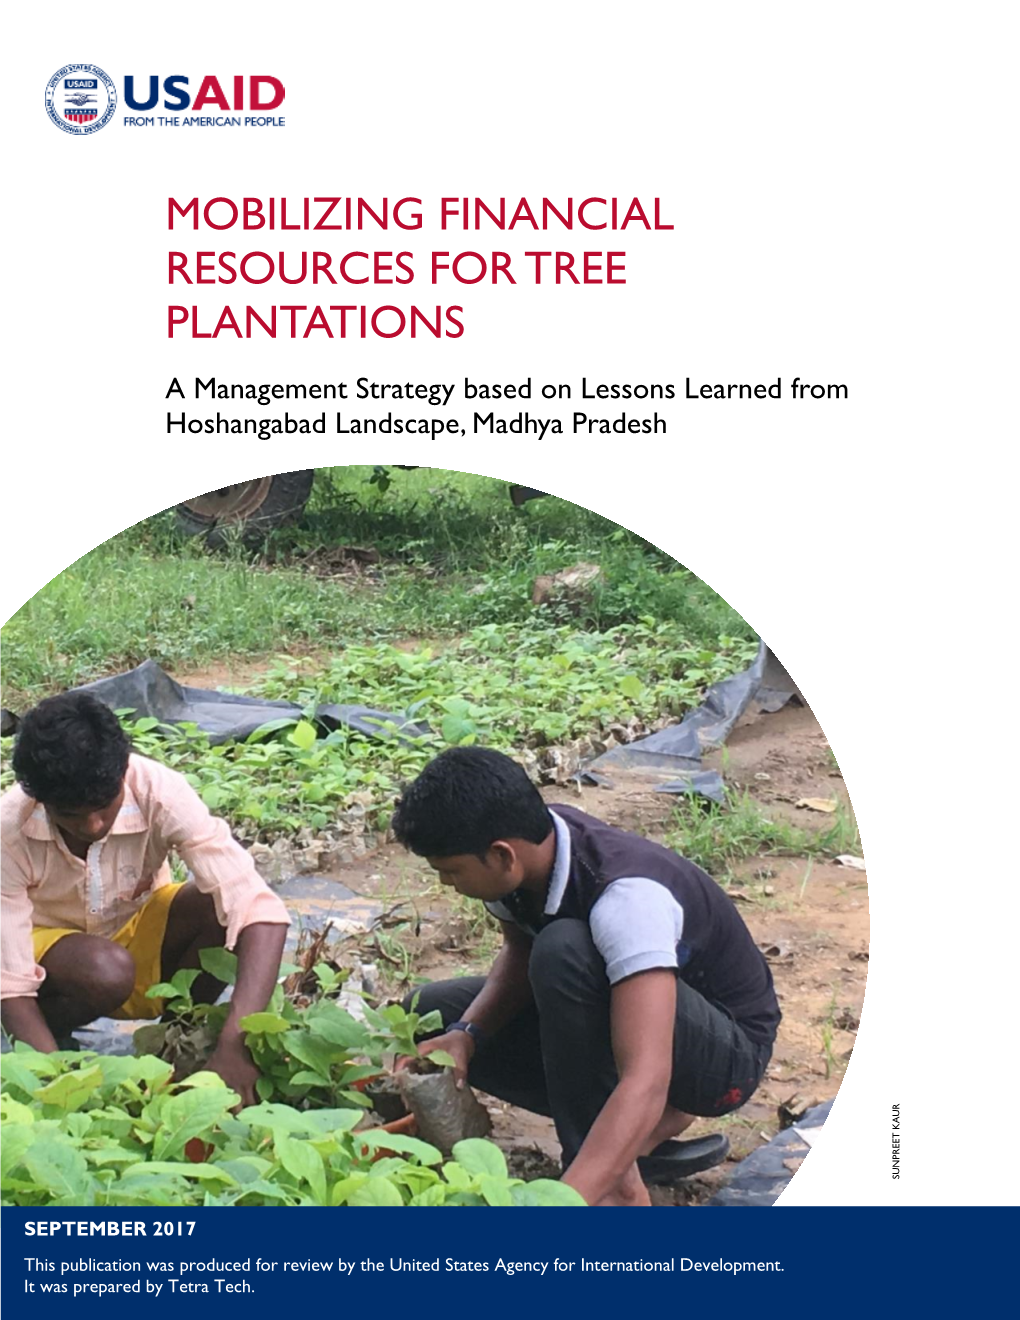 MOBILIZING FINANCIAL RESOURCES for TREE PLANTATIONS a Management Strategy Based on Lessons Learned from Hoshangabad Landscape, Madhya Pradesh